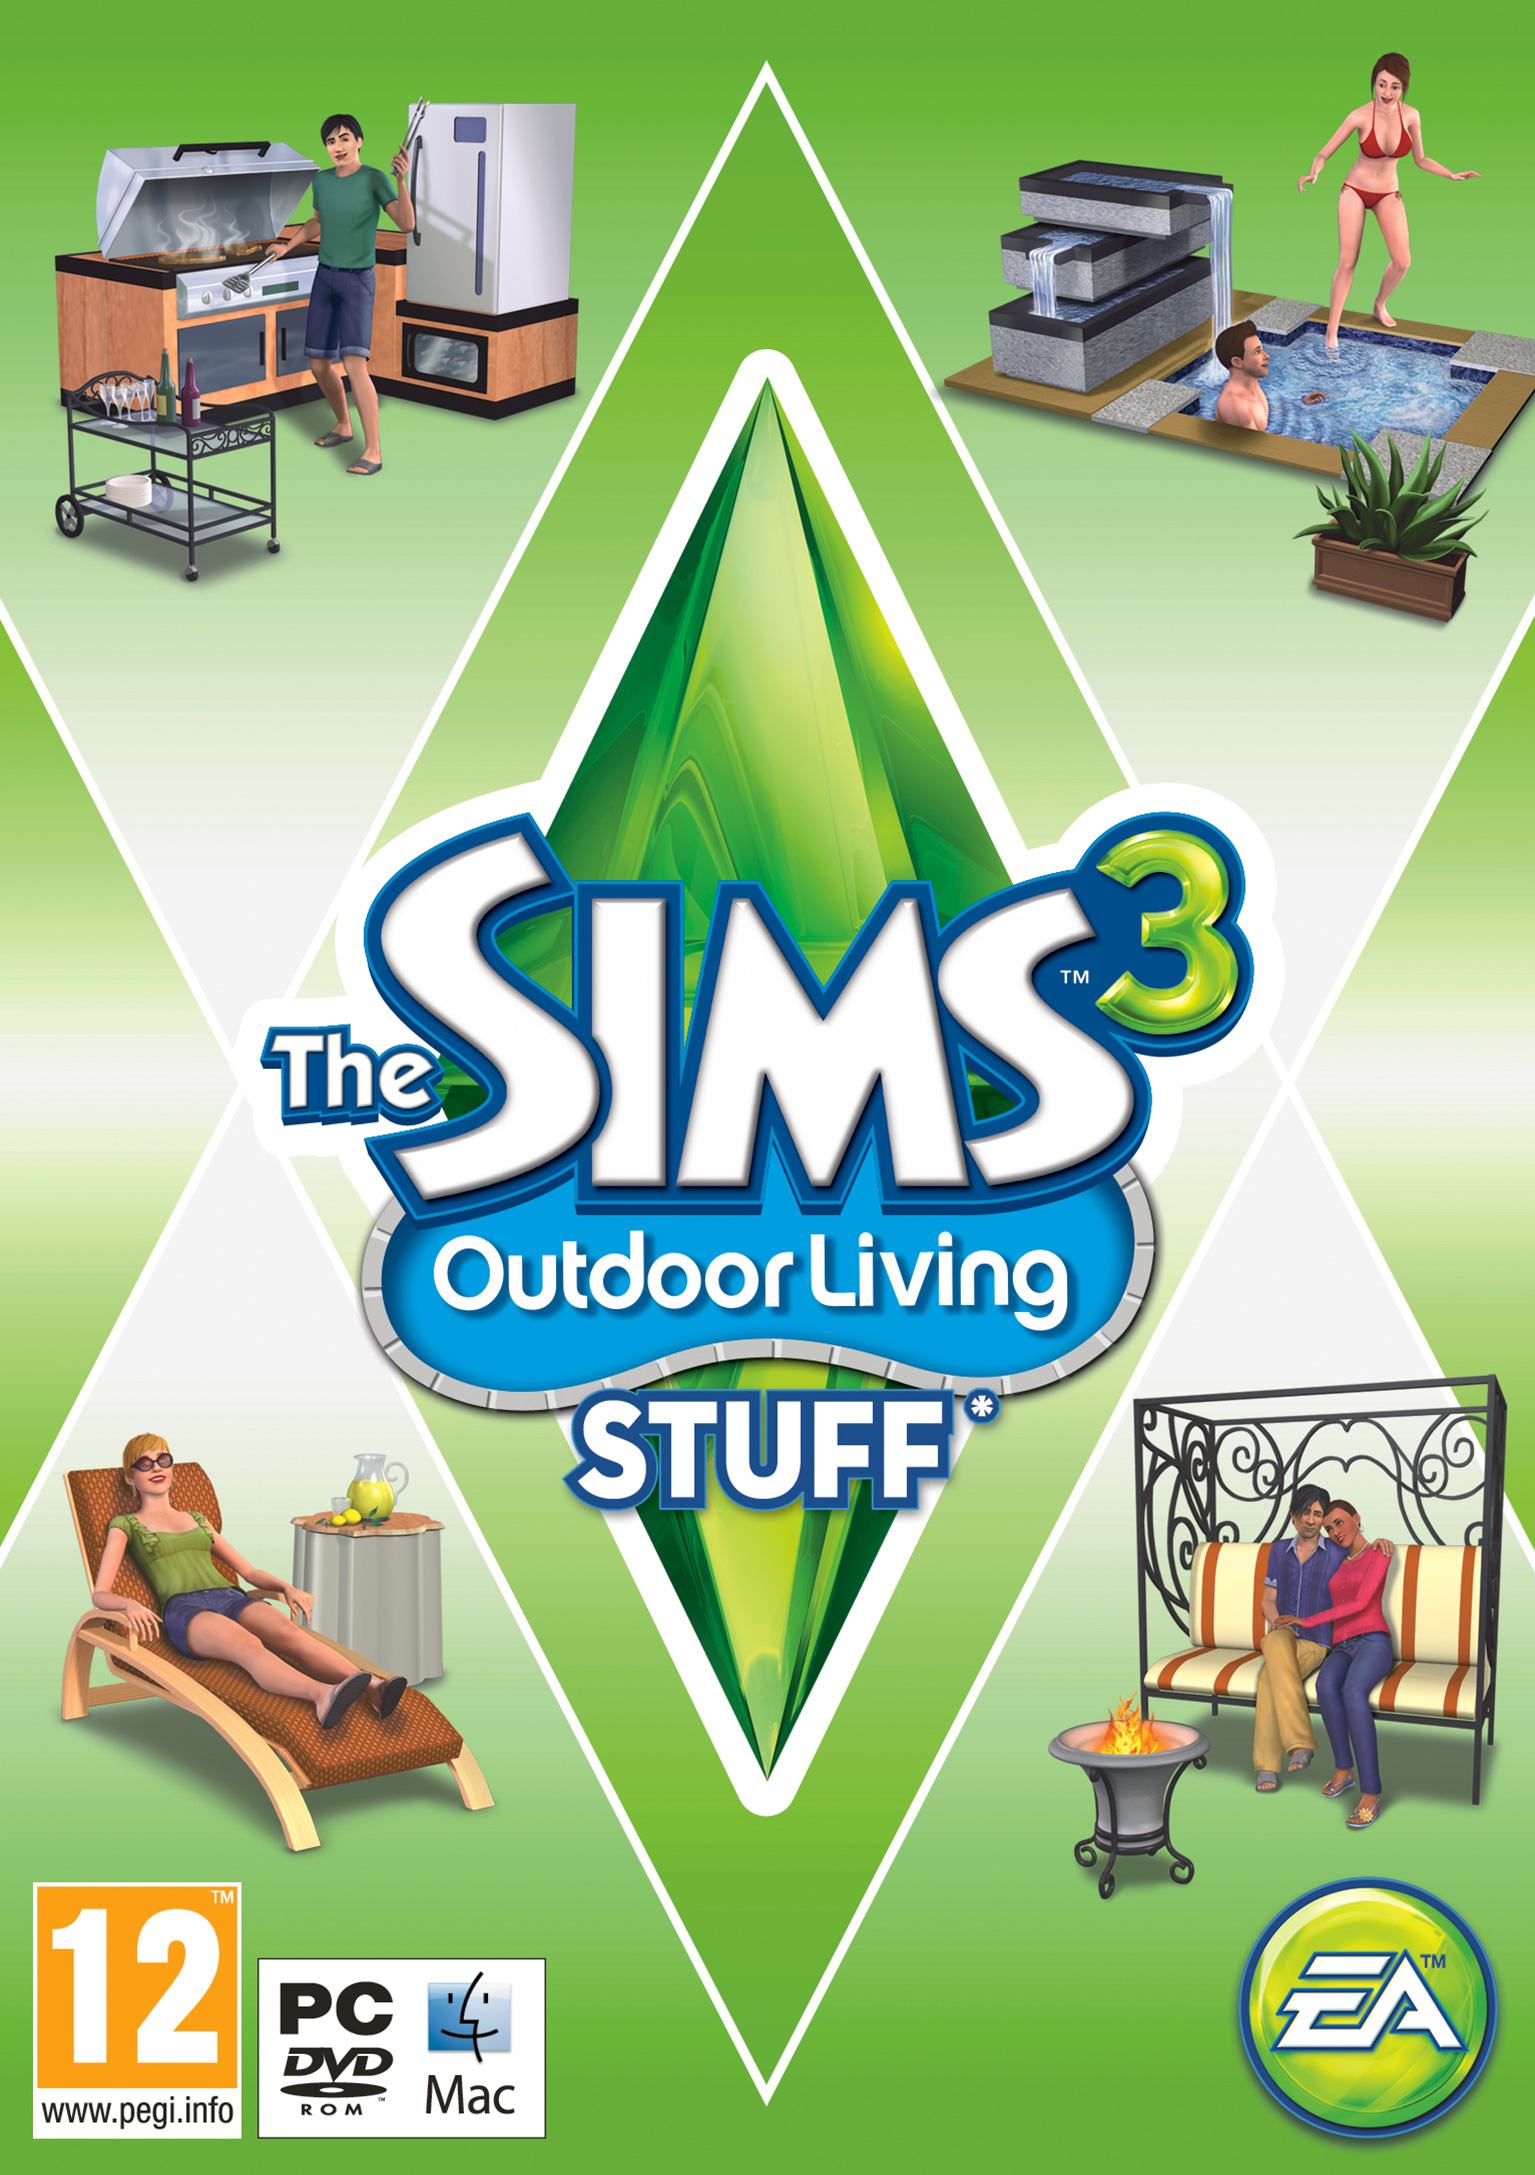 sims 4 pets expansion pack free download mac